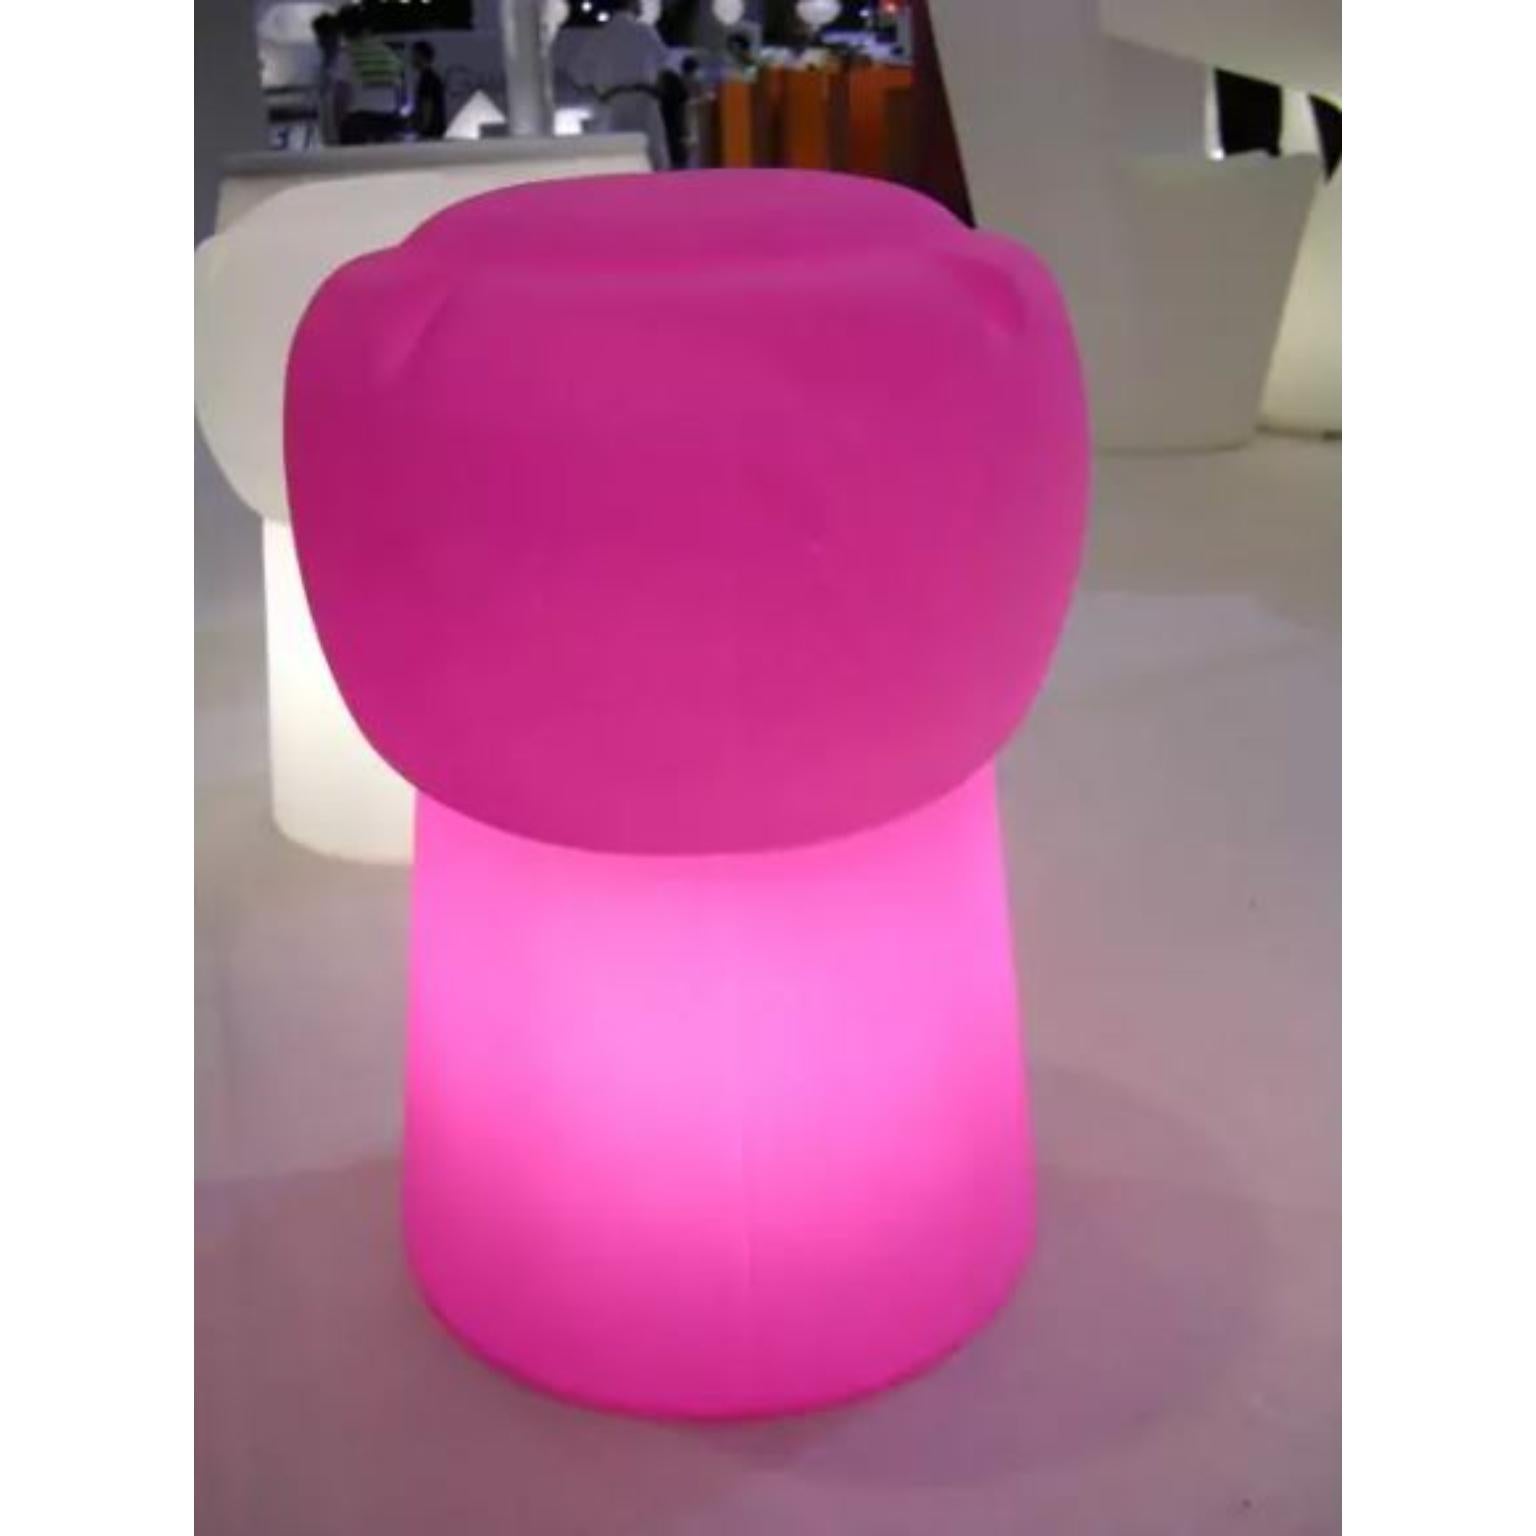 Flame Red Cin Cin Stool by SLIDE Studio
Dimensions: Ø 32 x H 49 cm. Seat Height: 49 cm.
Materials: Polyethylene.
Weight: 2 kg.

Available in different color options. This product is suitable for indoor and outdoor use. Please contact us. 

Our